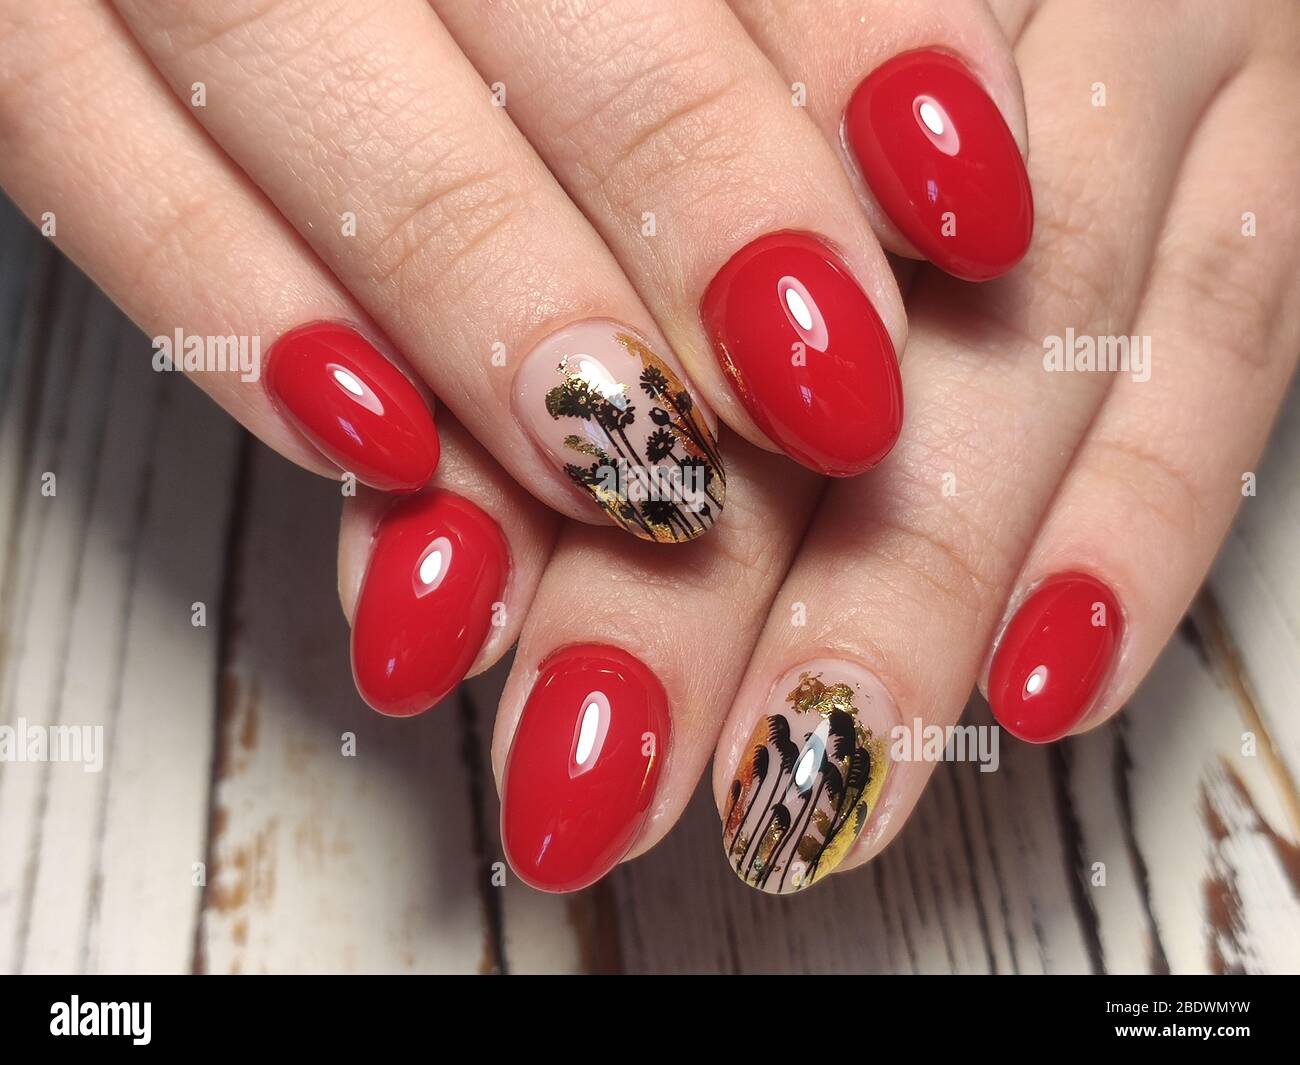 Cherry nails are about to be everywhere–here are 9 ways to try the chic  trend | Vogue India